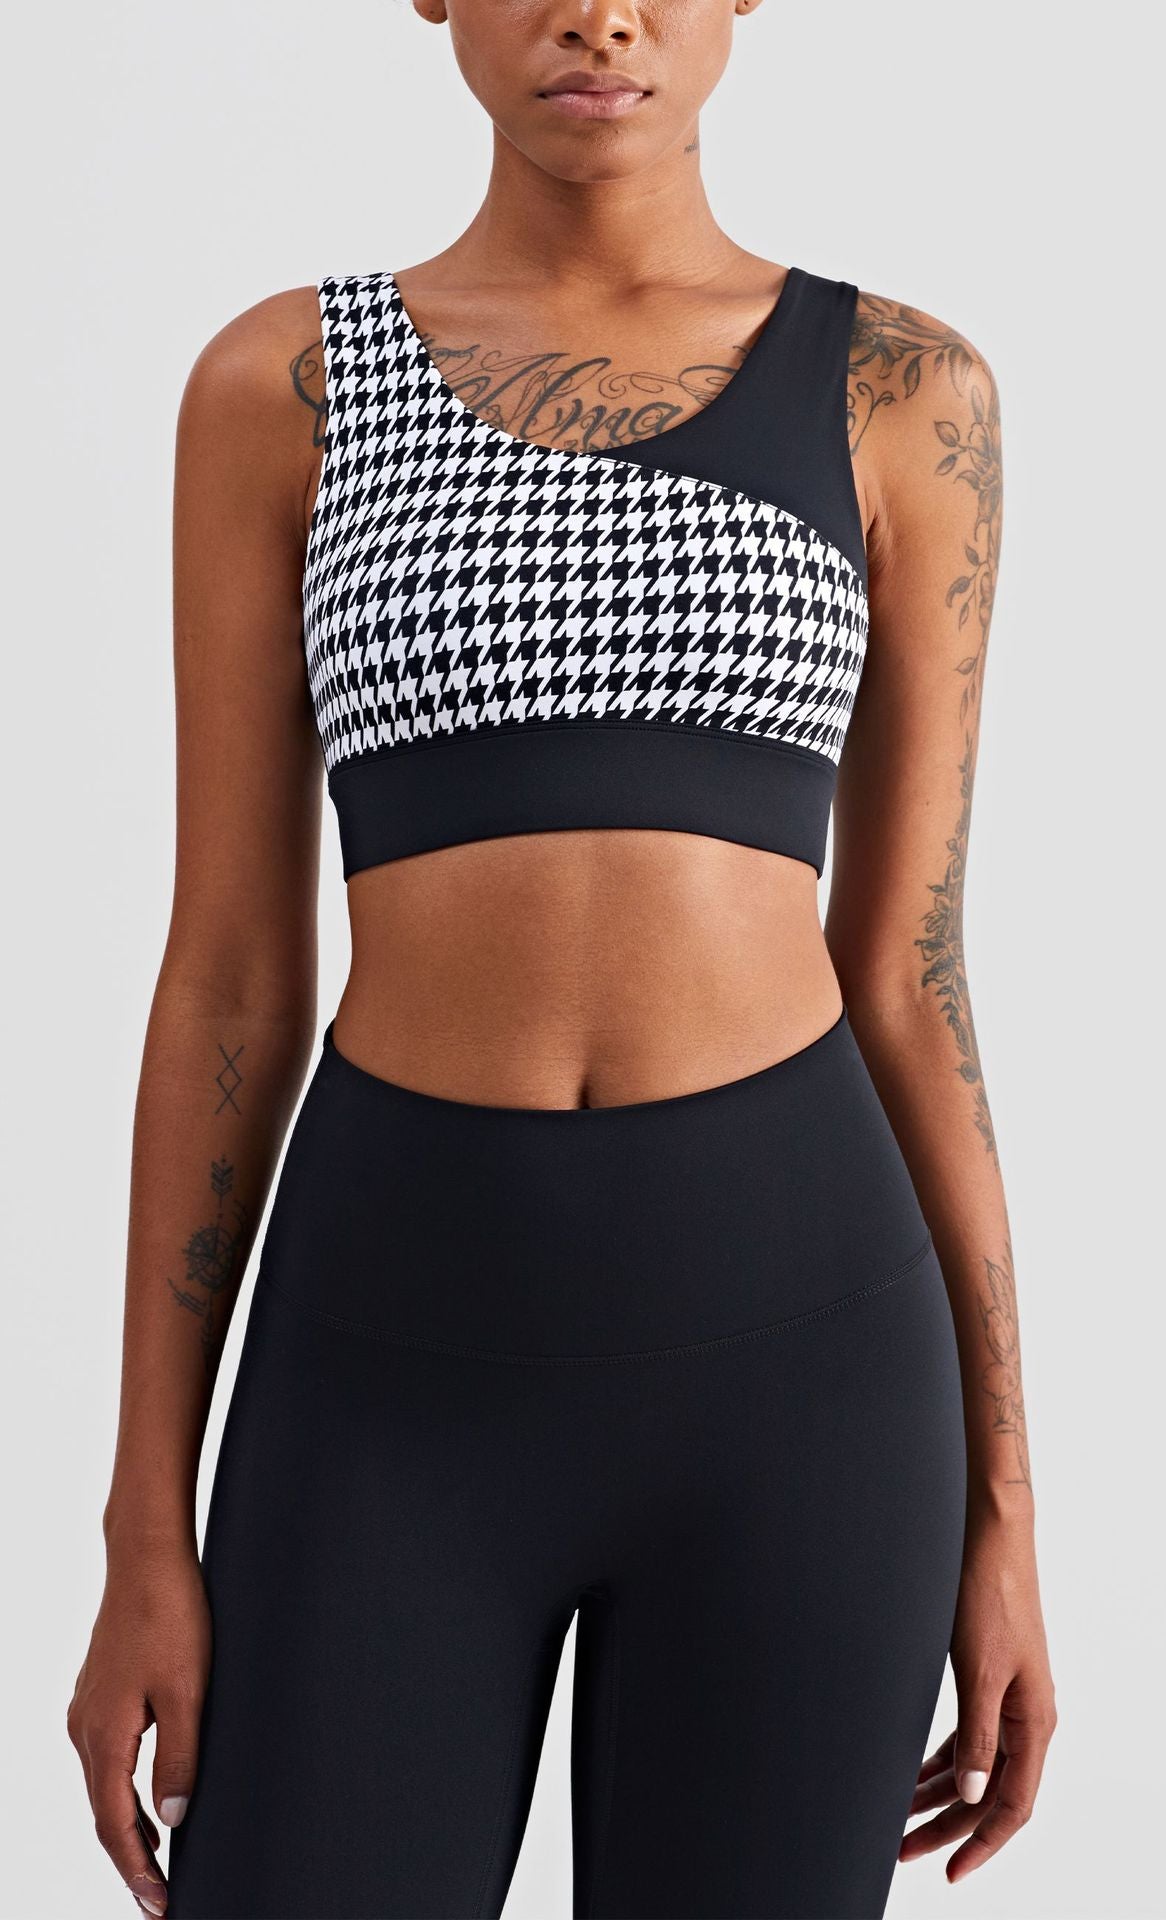 Houndstooth Nude Yoga Clothes